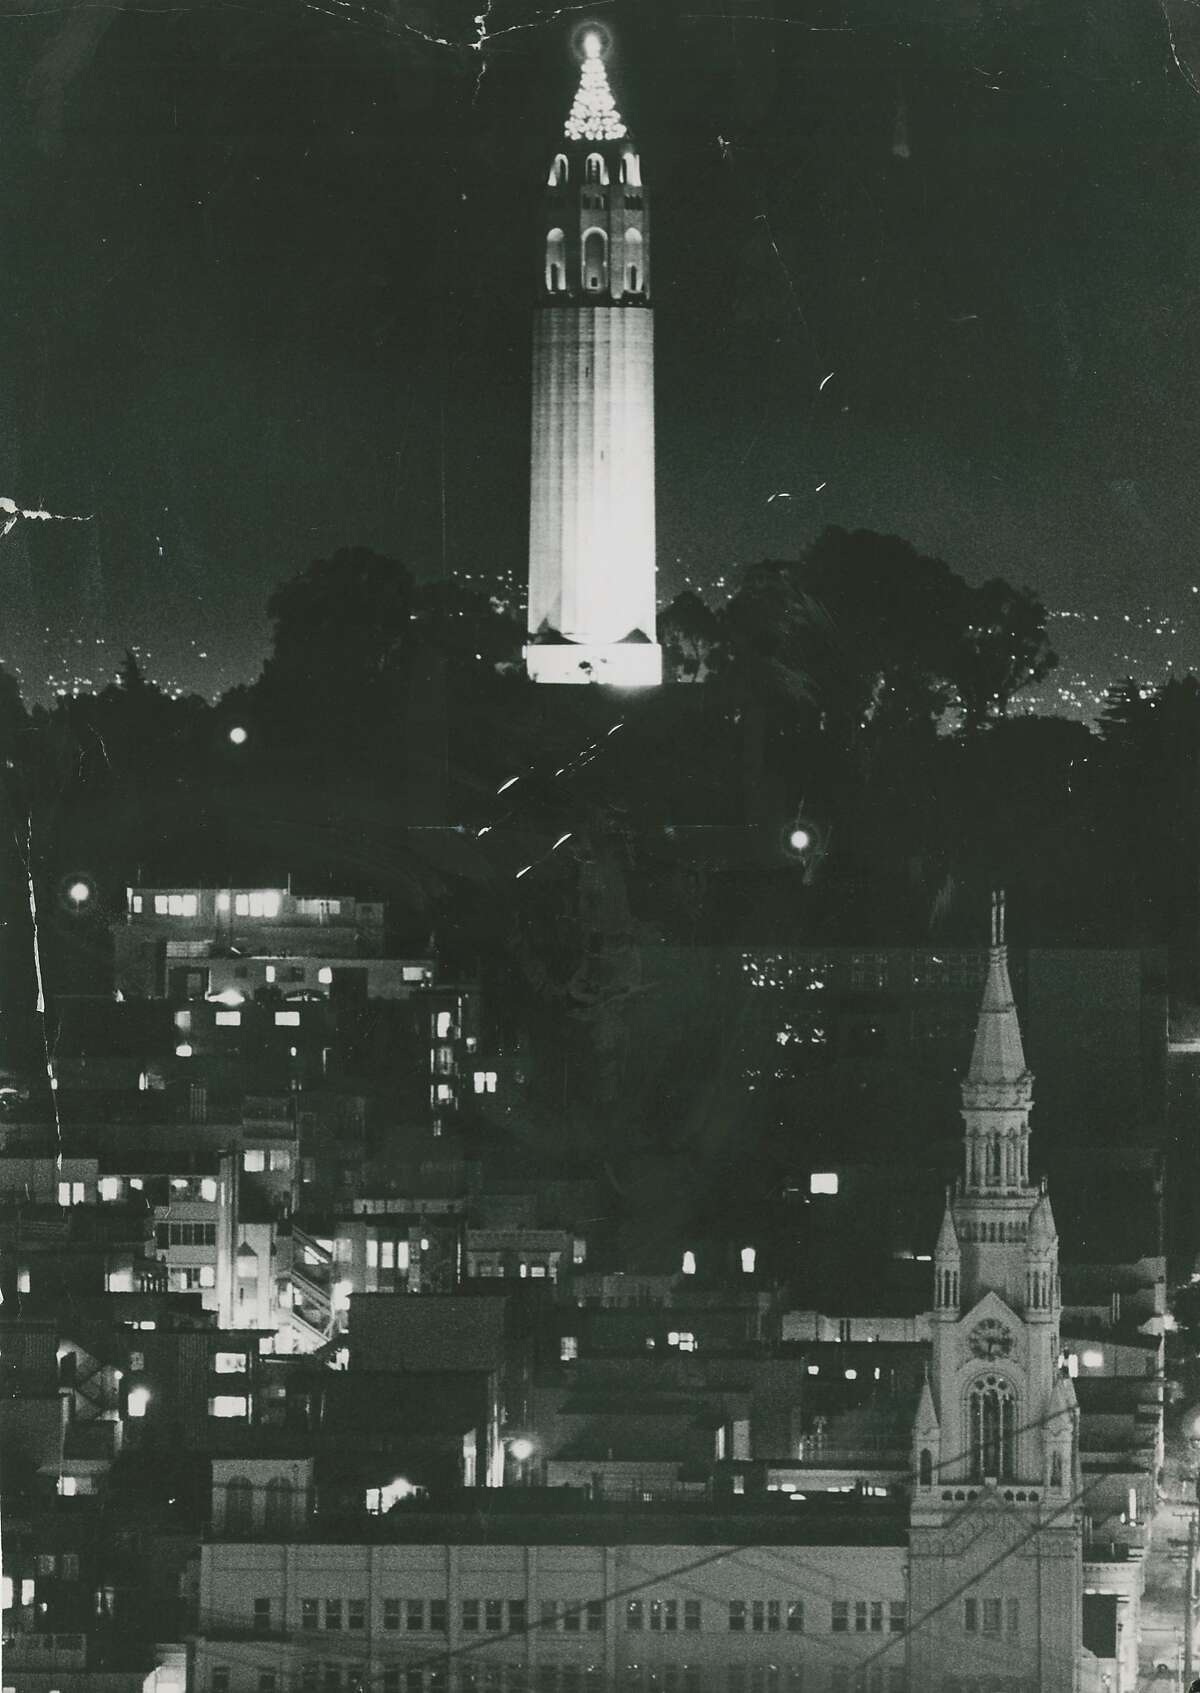 Coit Tower is adorned and lit for Christmas, December 22, 1970. Saints Peter and Paul Church is seen in the foreground.